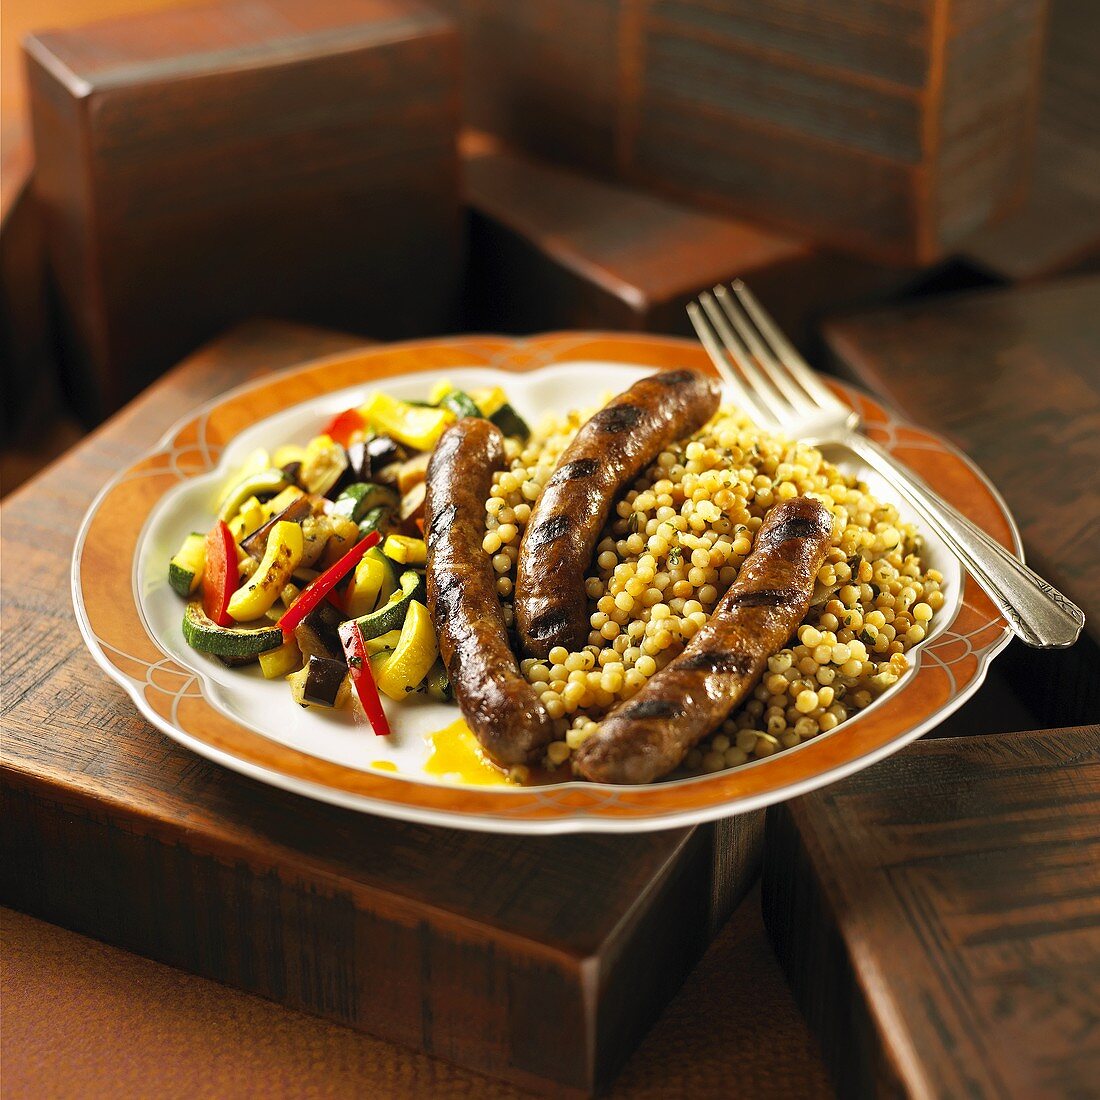 Serving of Merguez Sausage Over Israeli Couscous Served with Vegetable Medley